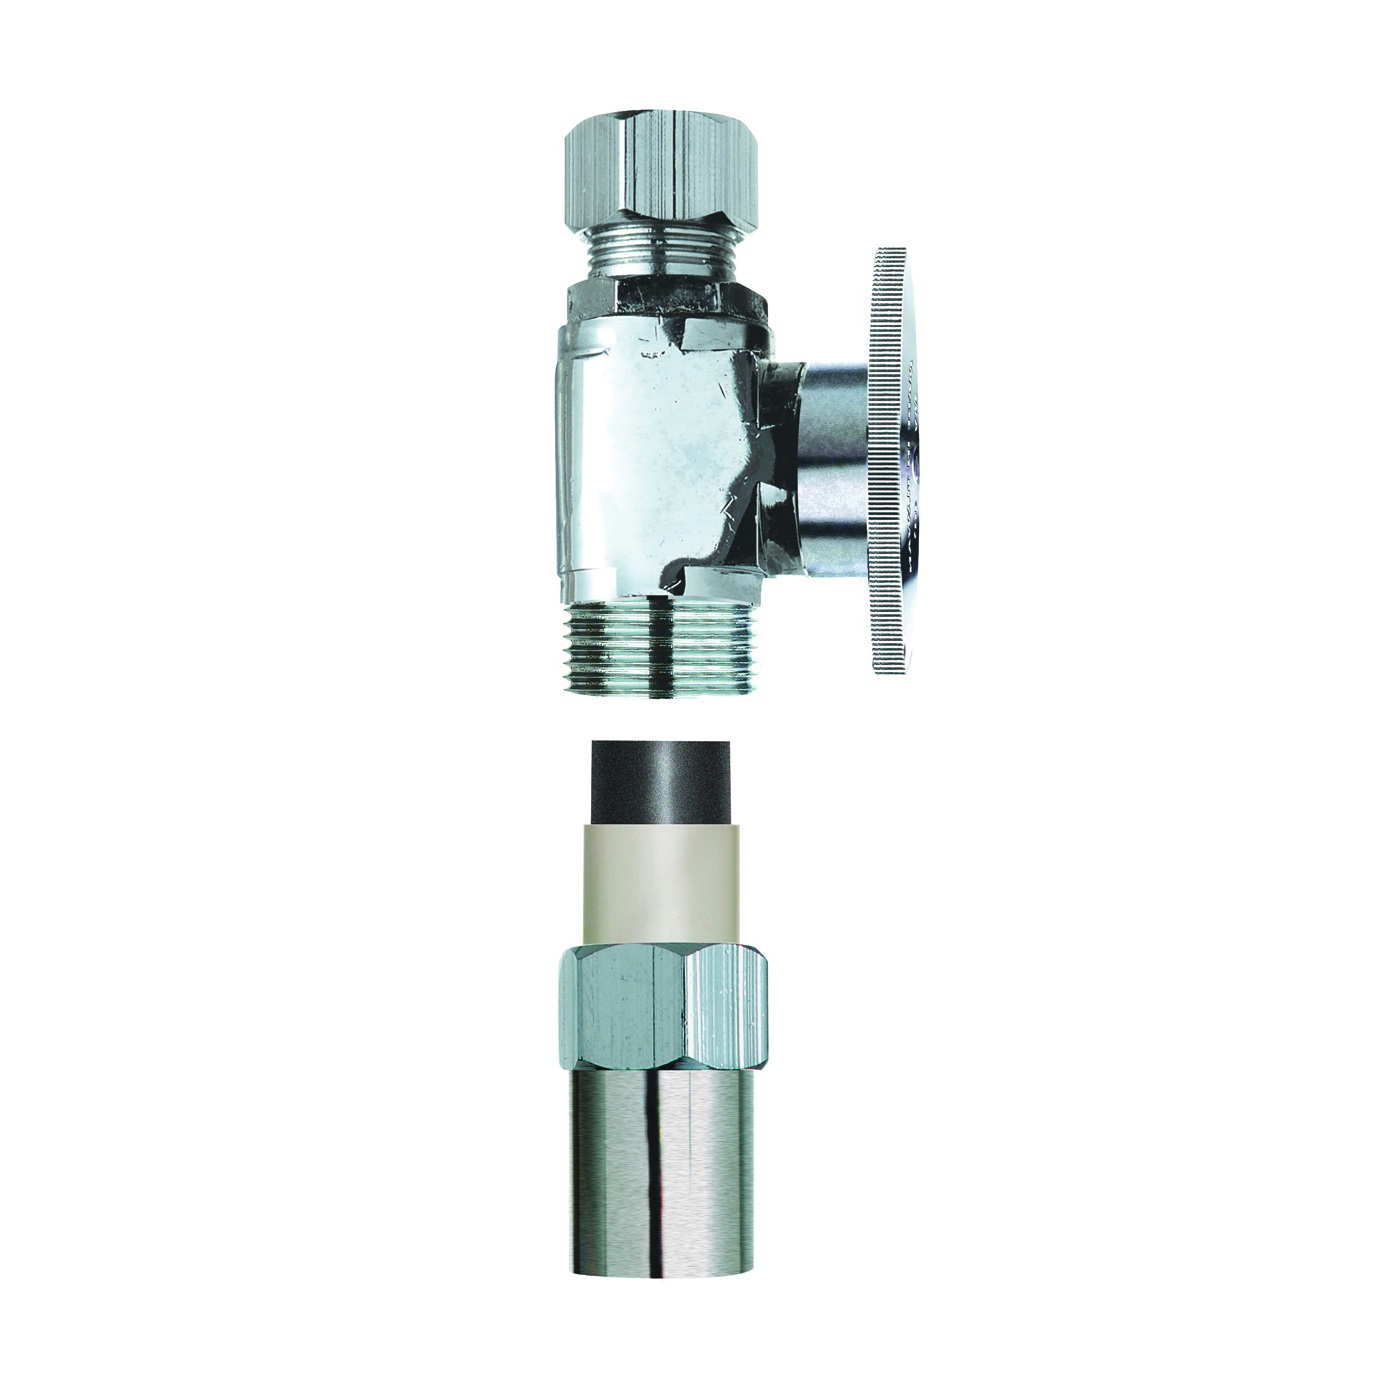 PP20322LF Transition Valve, 1/2 x 3/8 in Connection, CPVC x Compression, Brass Body